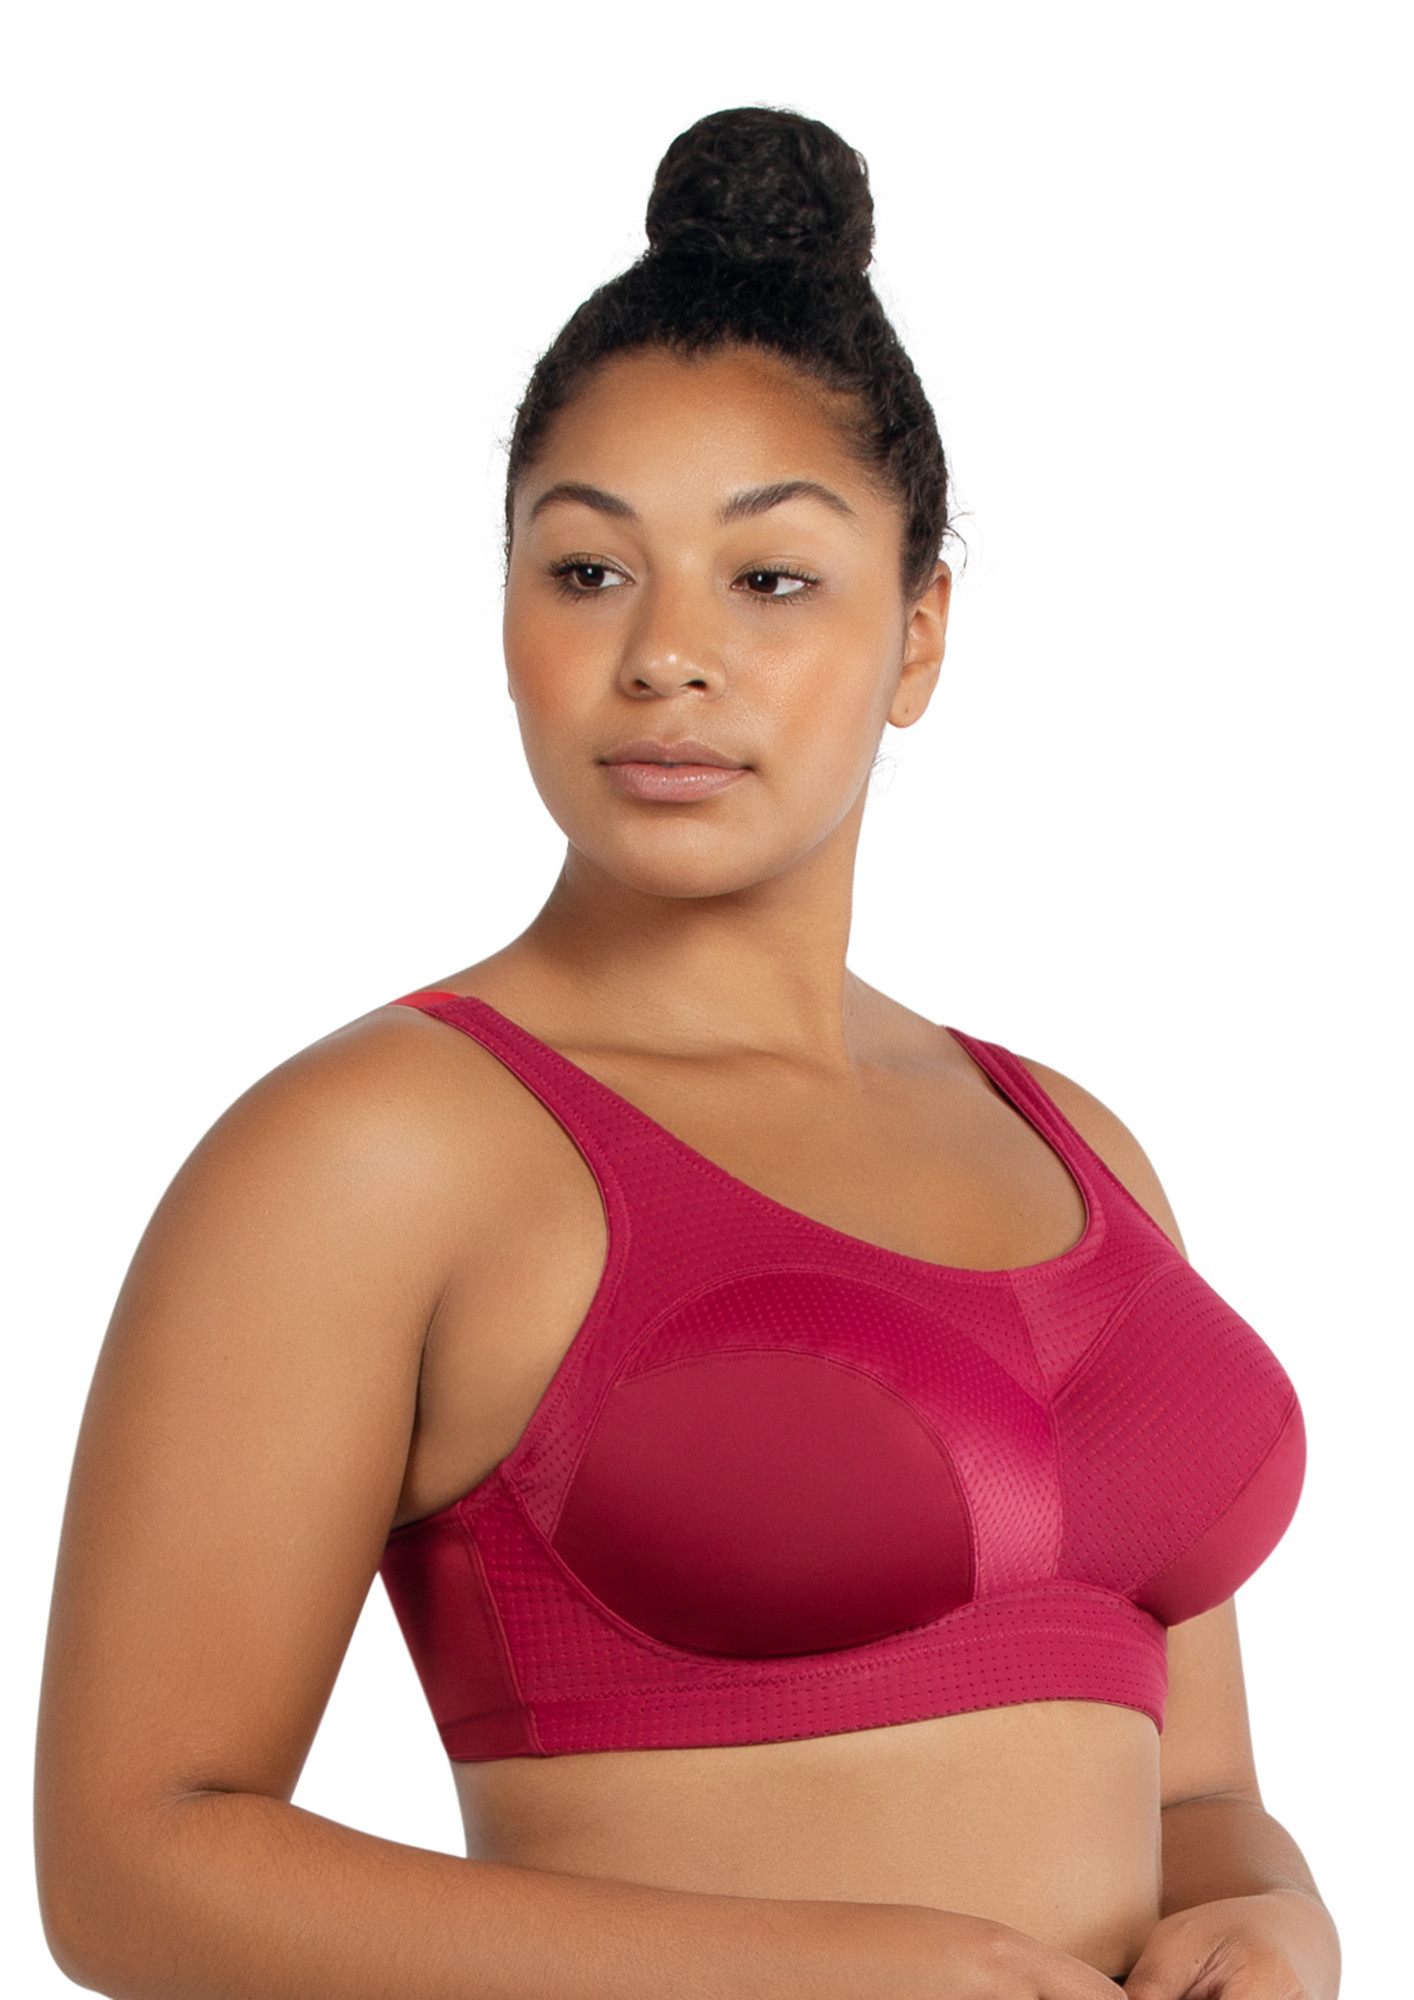 Buy ENERGY RUMBA RED W CHERRY UNLINED WIRED SPORTS BRA for Women